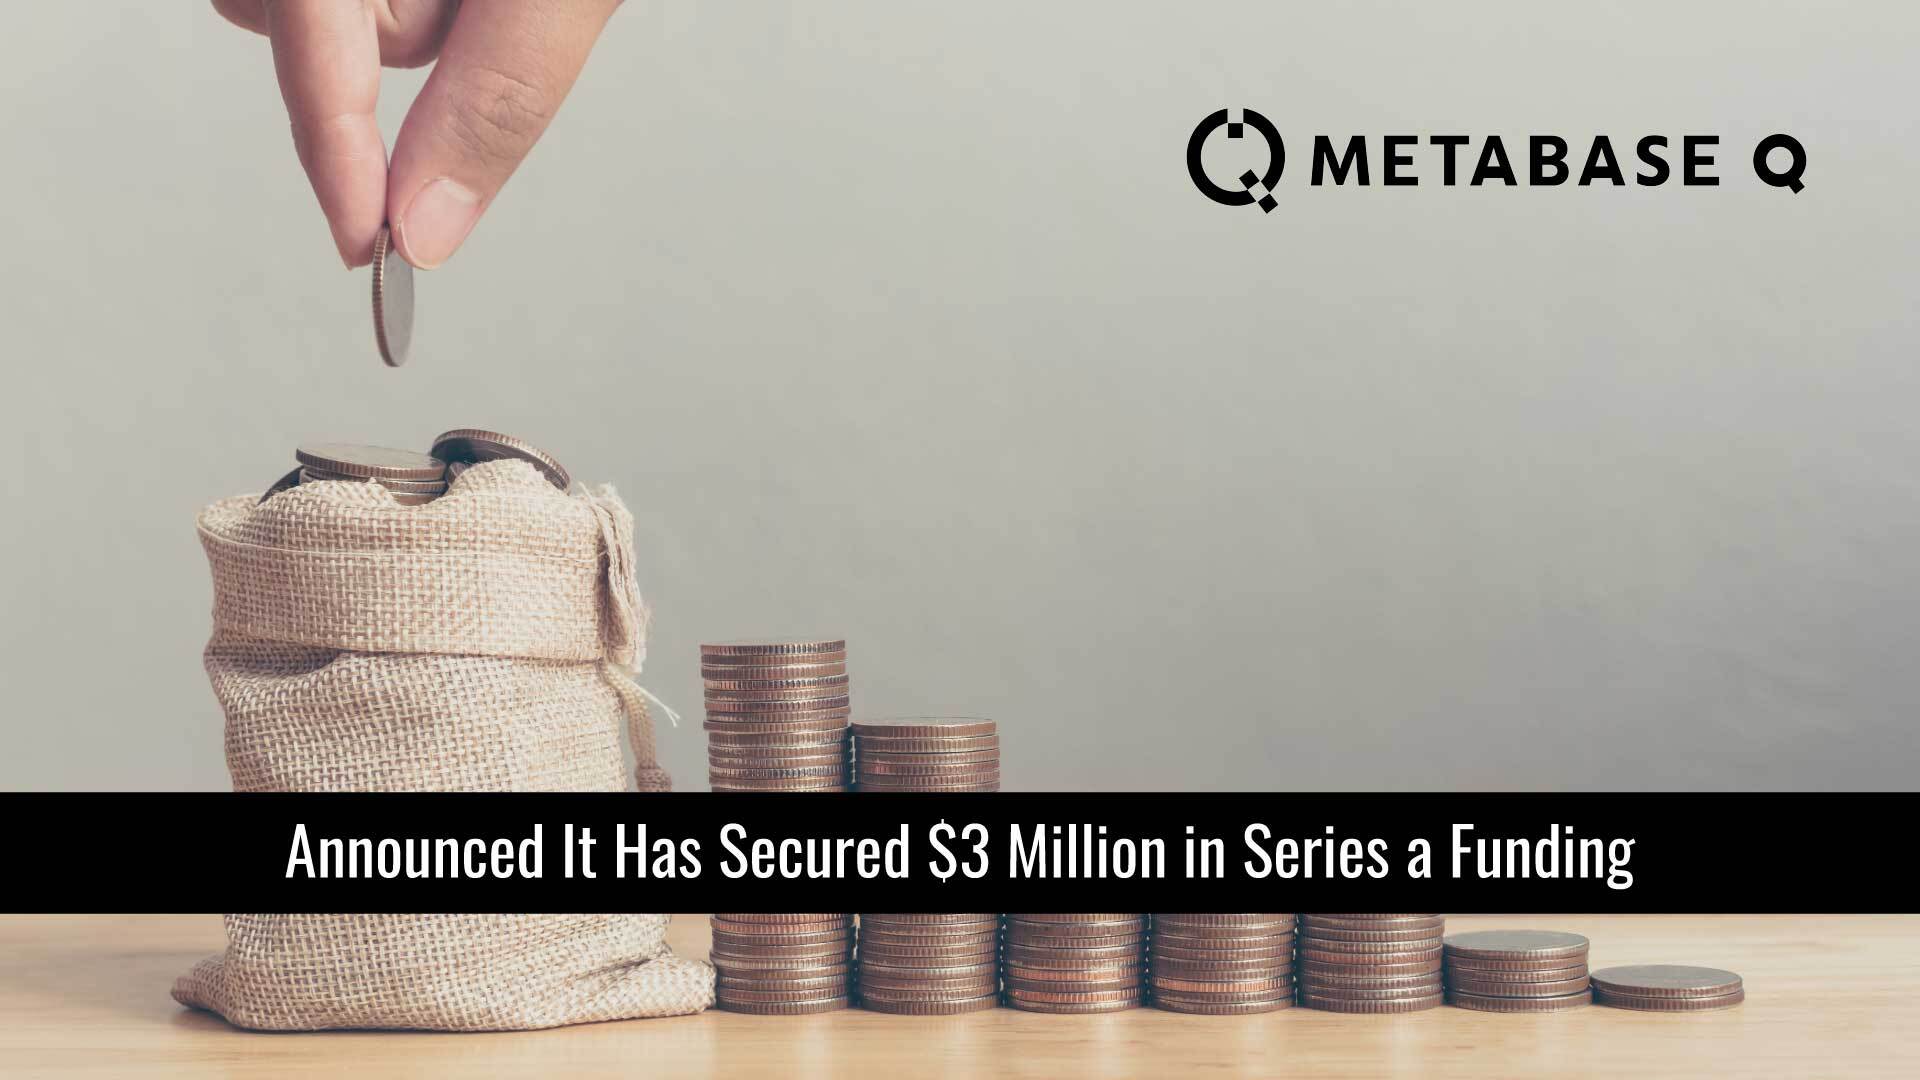 Metabase Q Announces Series A Funding Investment to Make Cybersecurity Accessible, Understandable, and Manageable for Businesses in Latin America